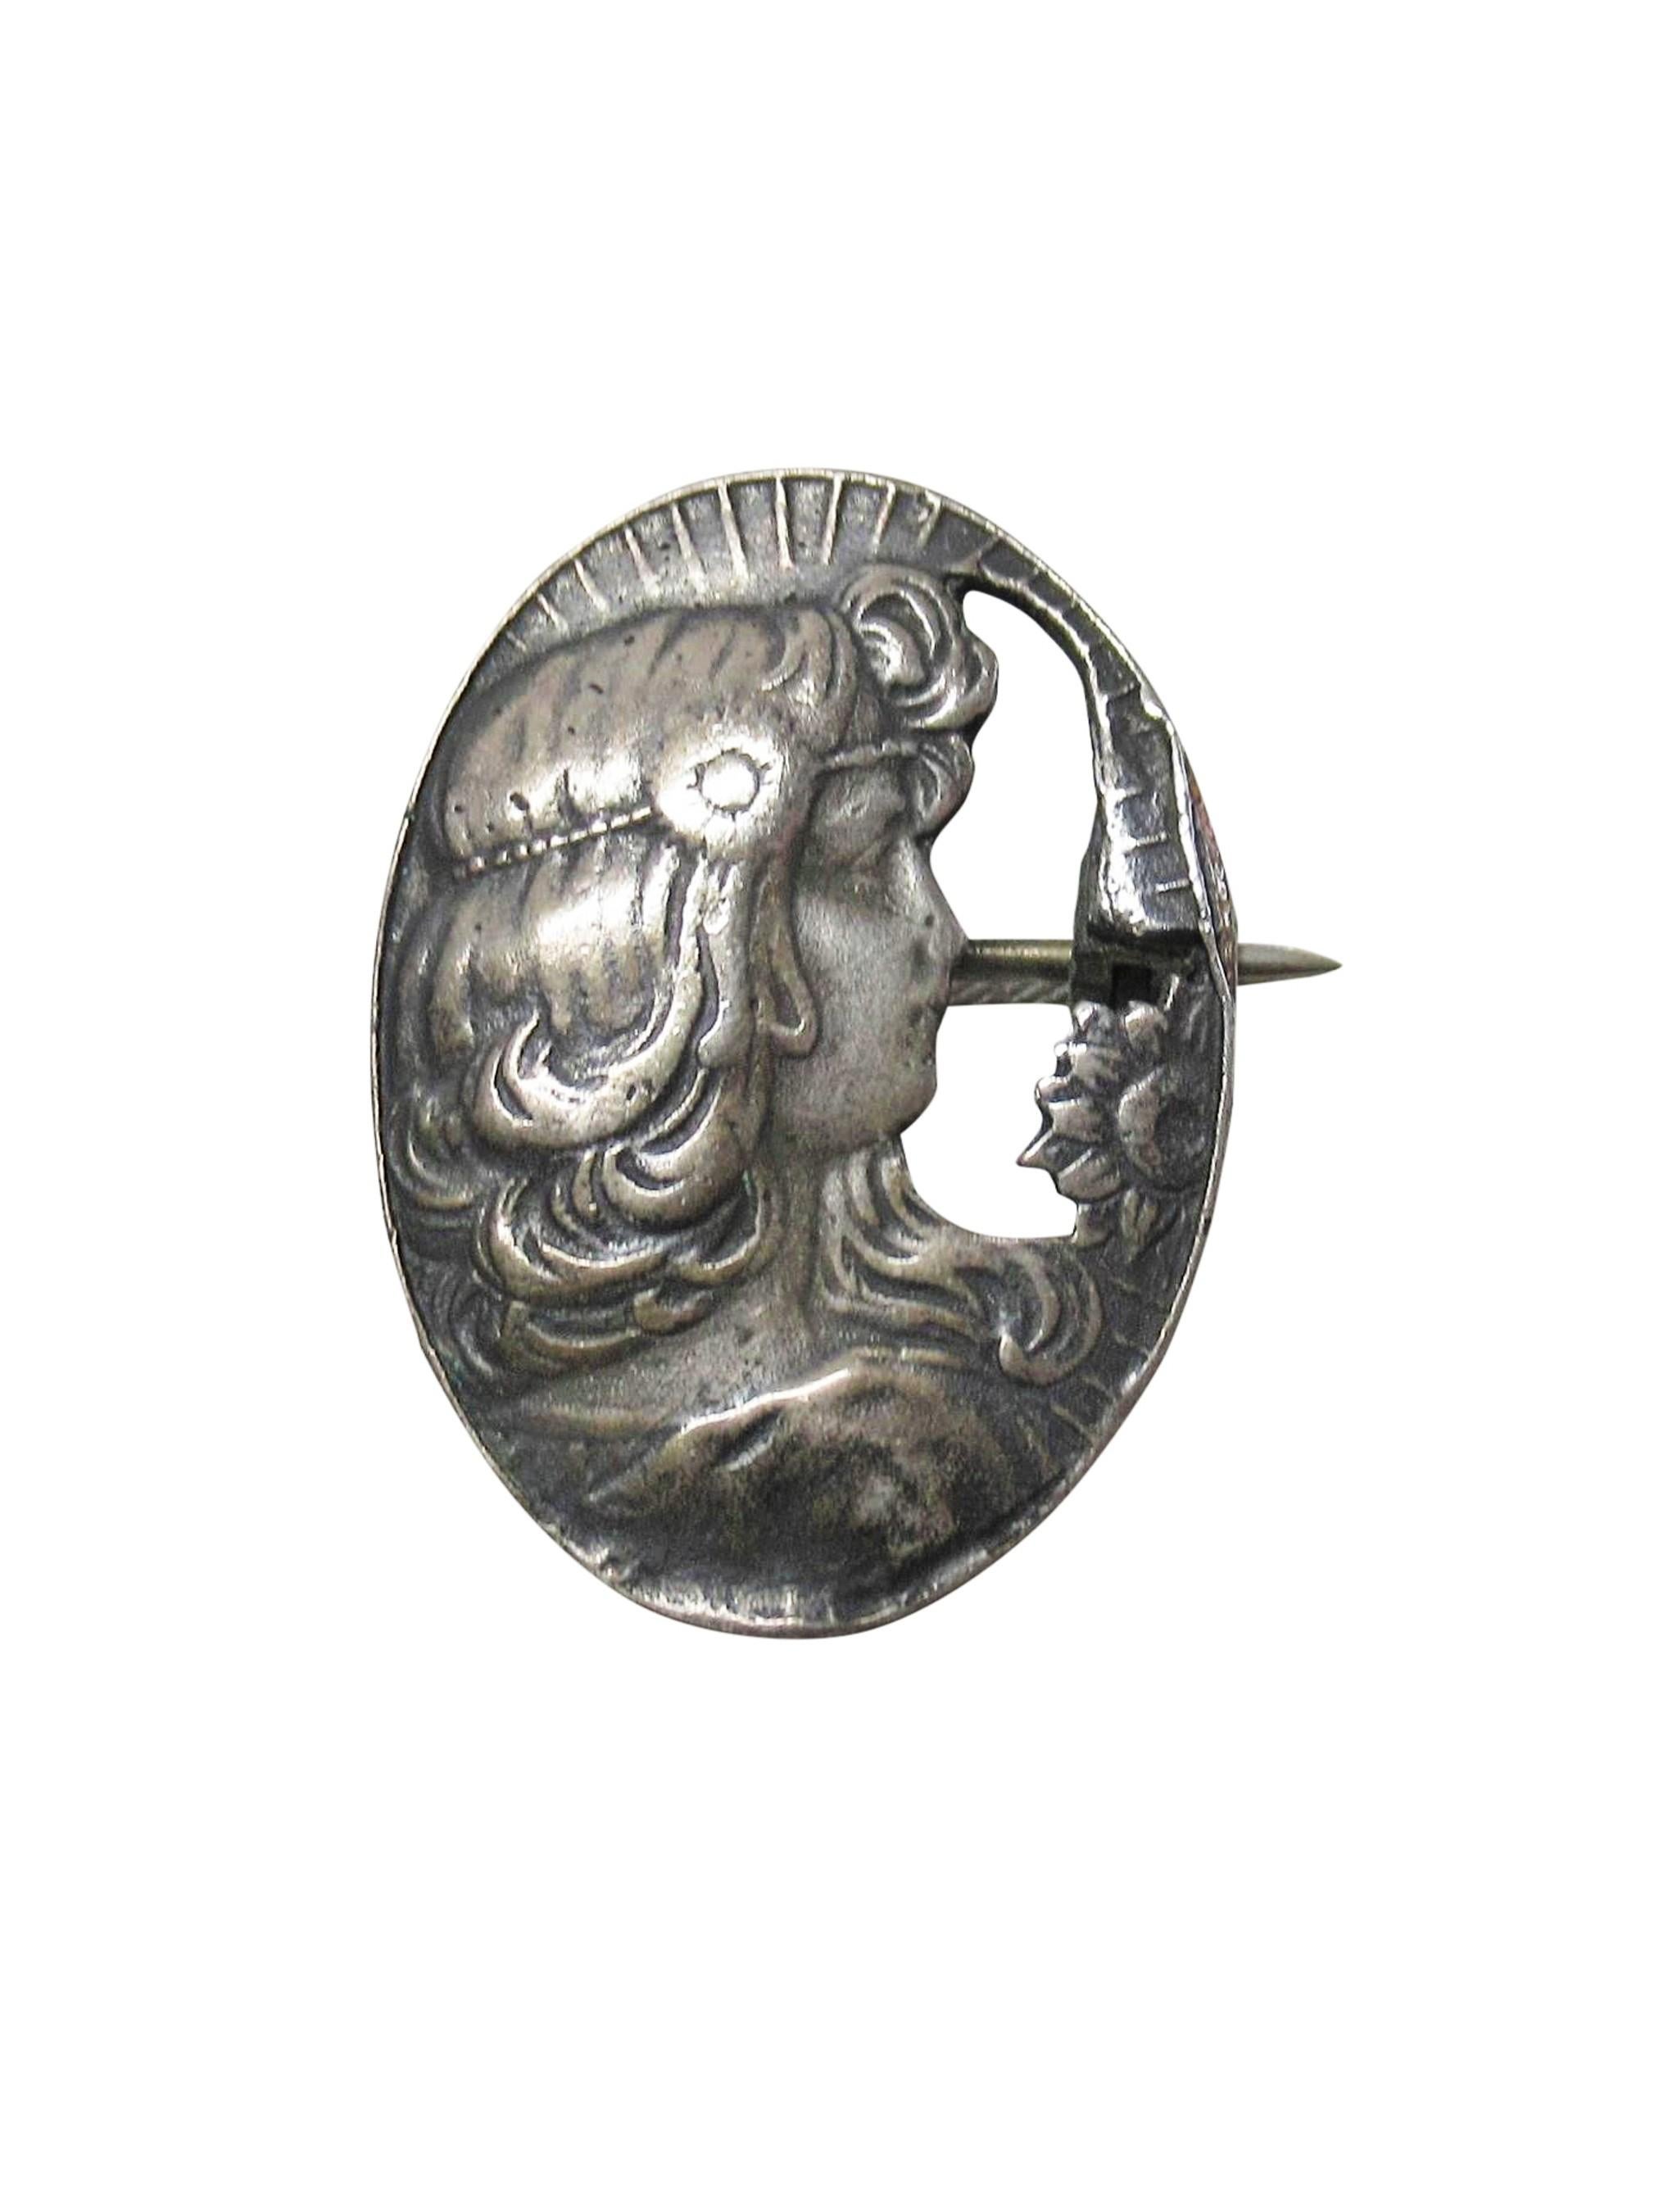 Lovely Art Nouveau sterling silver pendant and brooch featuring the profile of a woman. She is quite lovely, with flowing hair adorned with headband hair jewelry further embellished with a flower. She has sunrays atop her head and a sunflower across